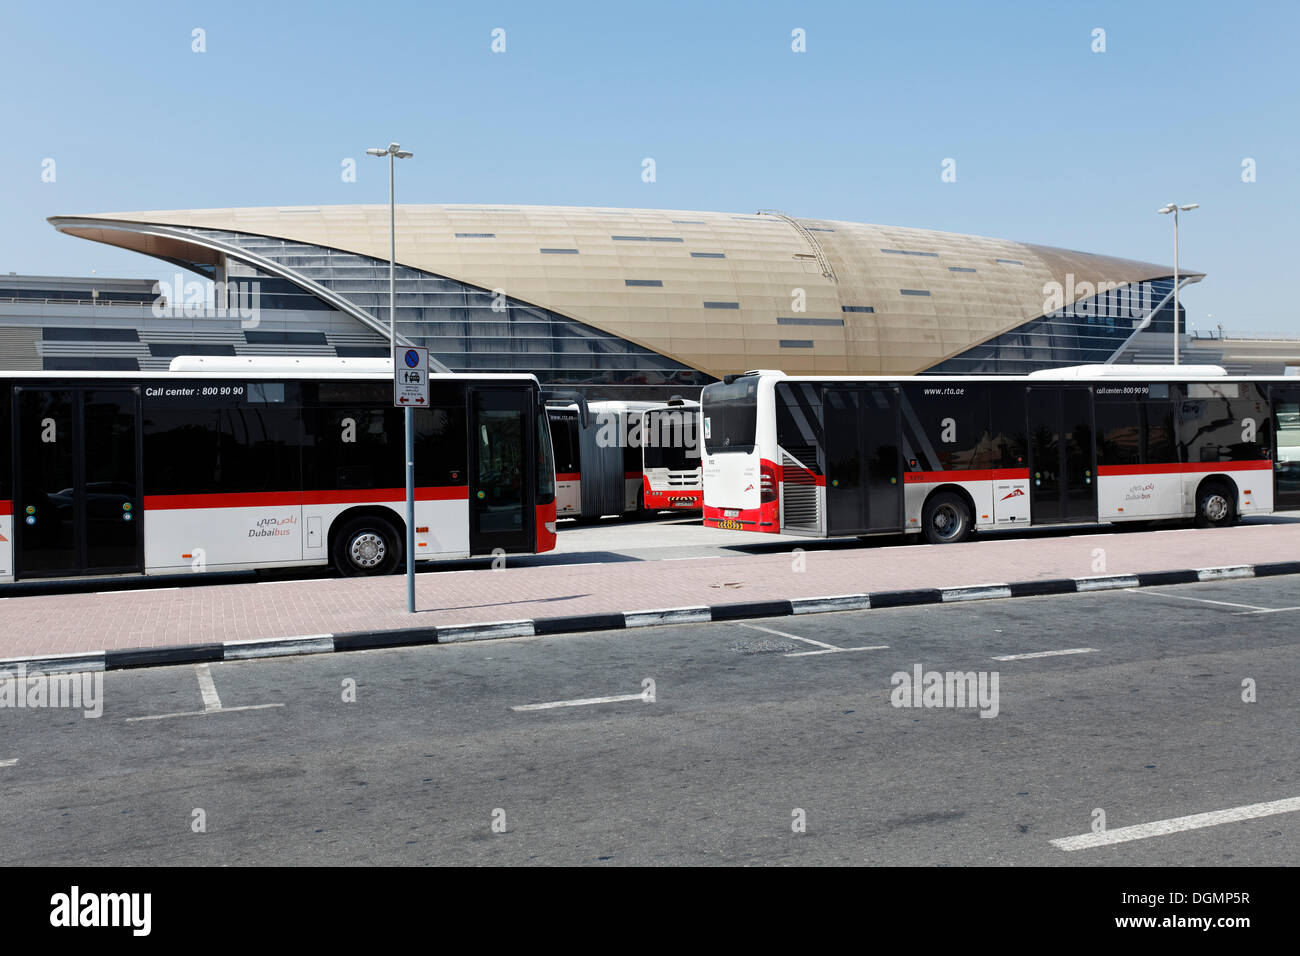 Buses in front of the Metro Station of Ibn Battuta Mall, Dubai, United Arab Emirates, Middle East, Asia Stock Photo